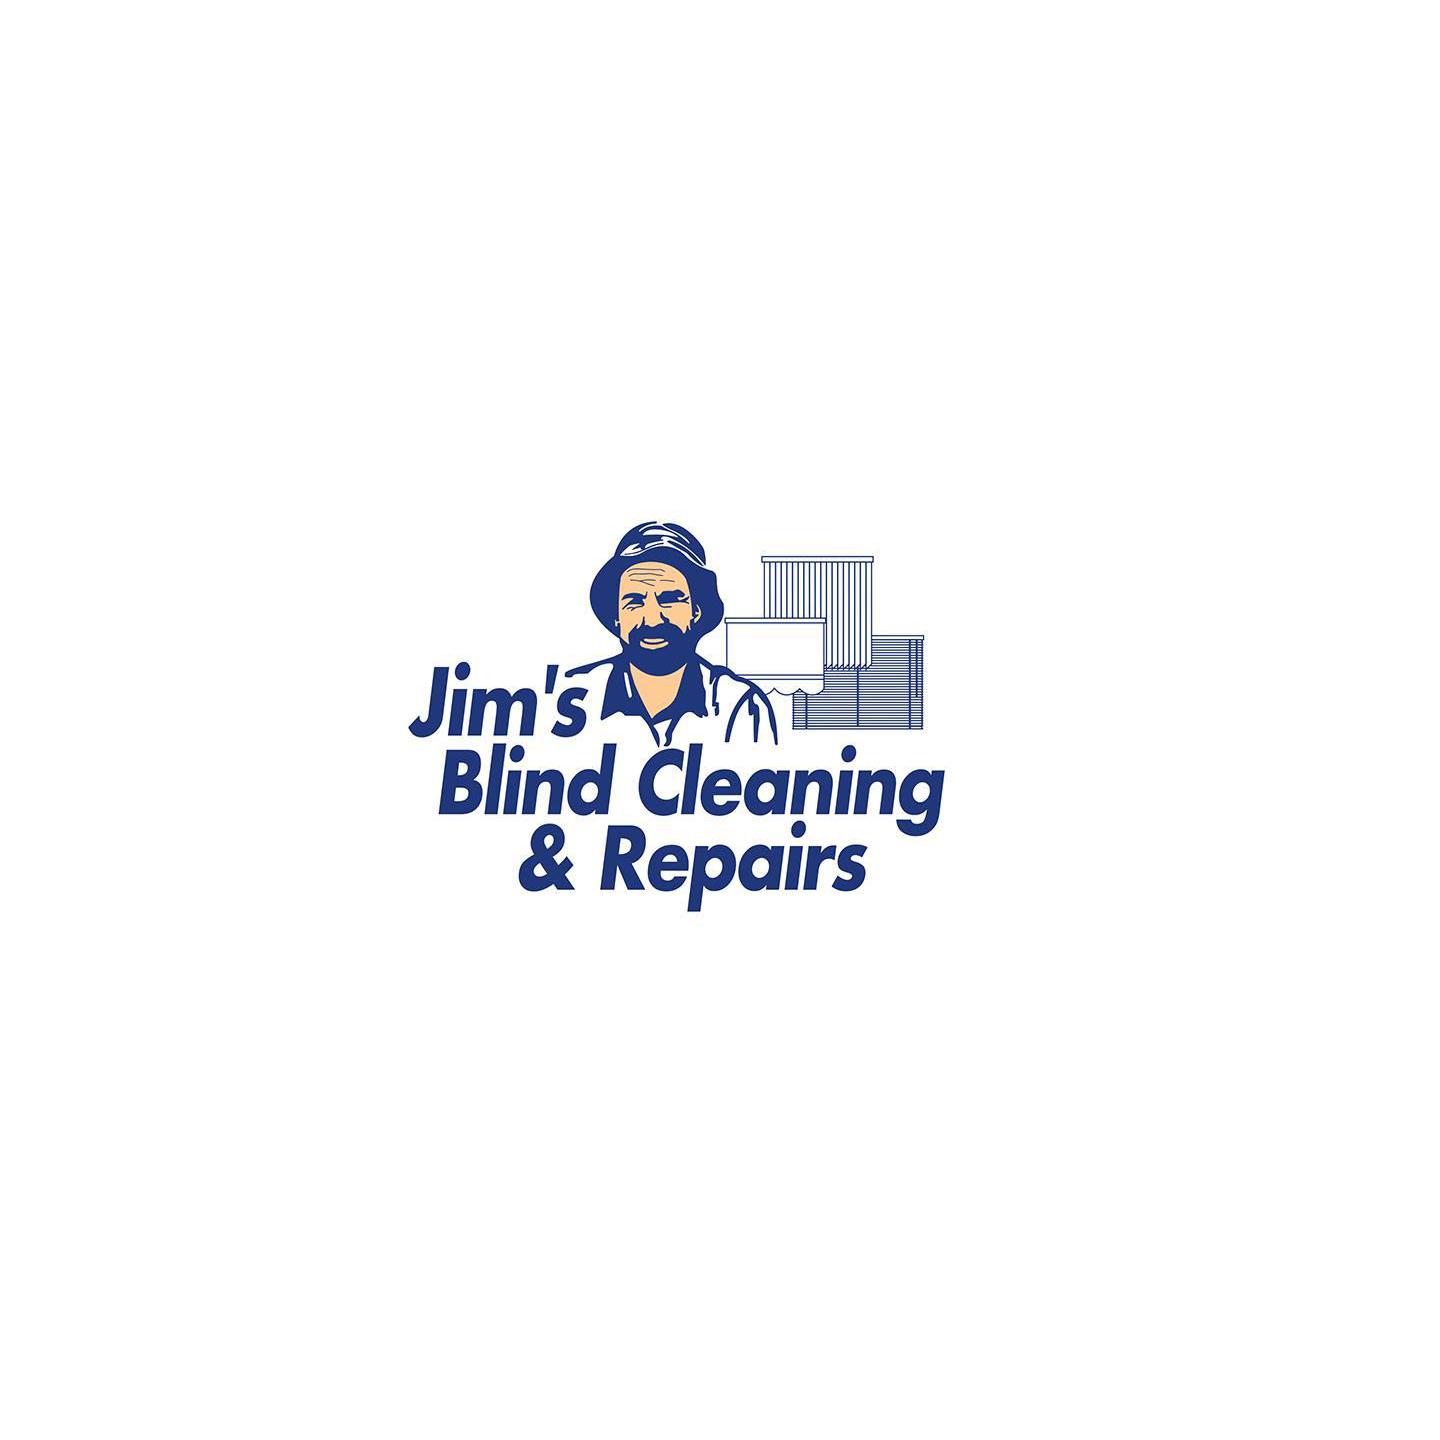 Jim's Blind Cleaning & Repairs South Canberra Casey